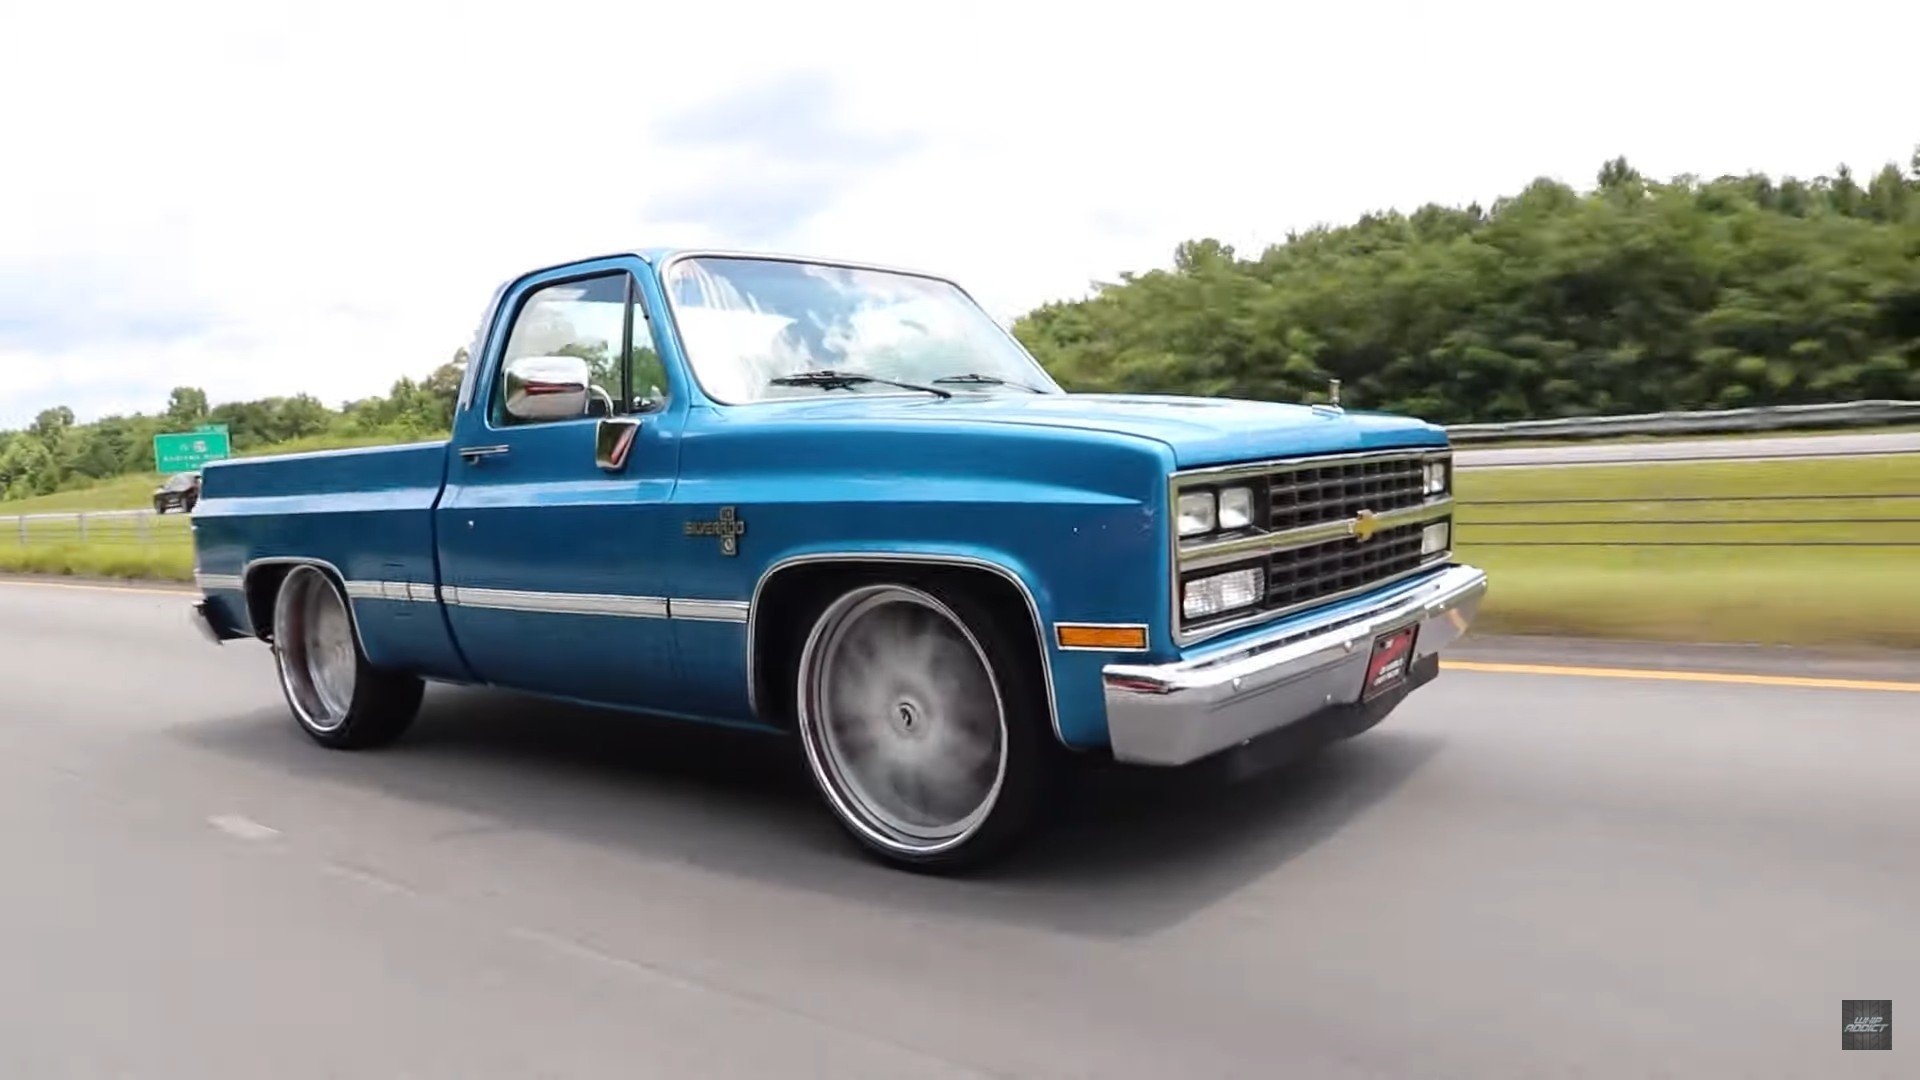 Clean Blue Chevy C10 Silverado Rides On 26 Inch Forgiatos To Elevate Its LS3